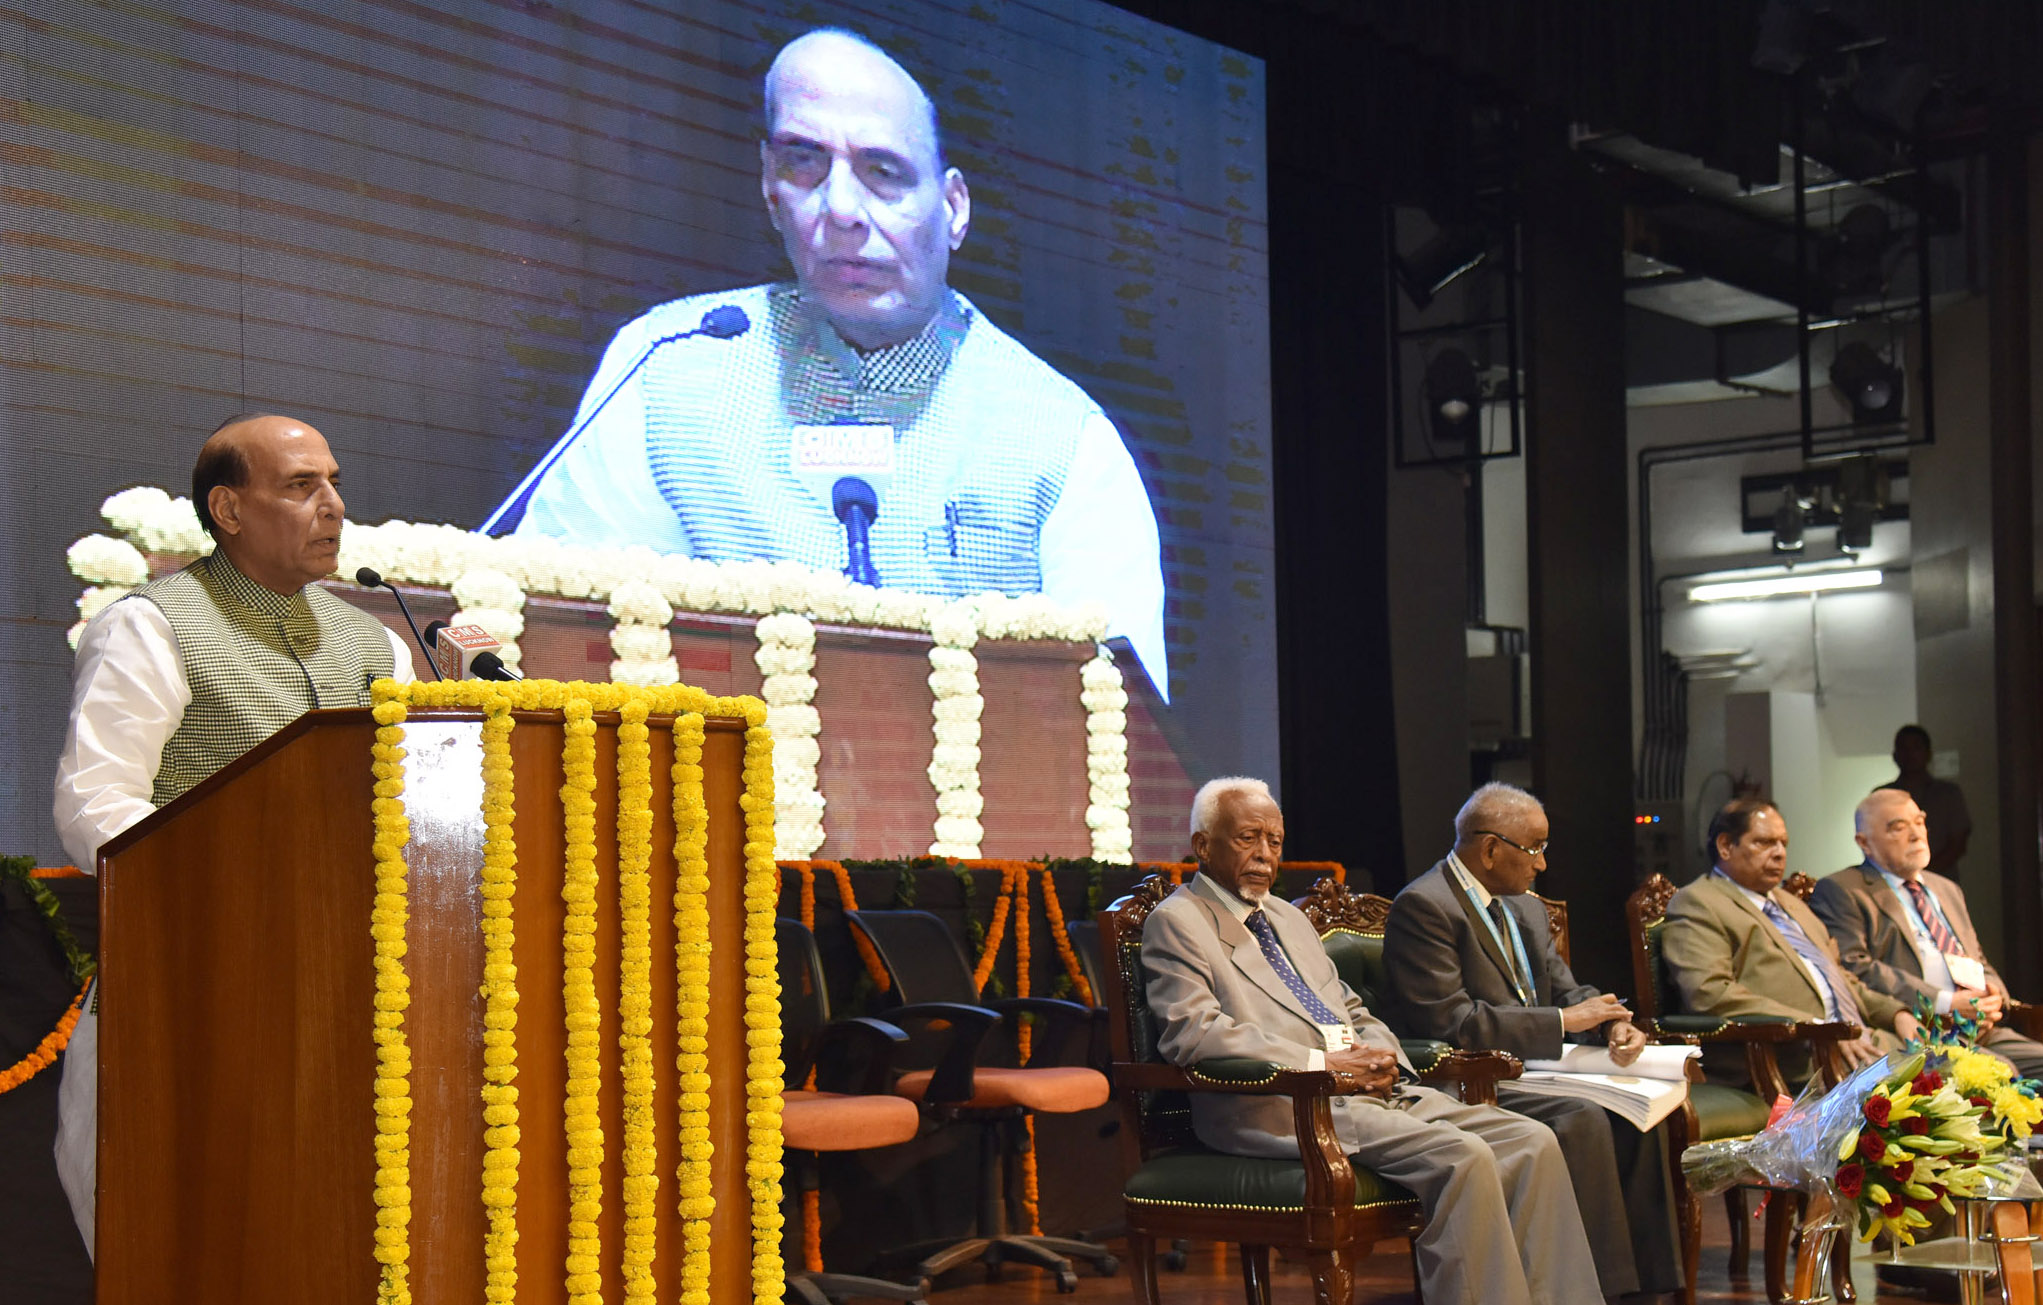 The Union Home Minister, Shri Rajnath Singh addressing at the 17th International Conference of Chief Justice of the world on Article 51 of the Indian Constitution, in New Delhi on November 10, 2016.